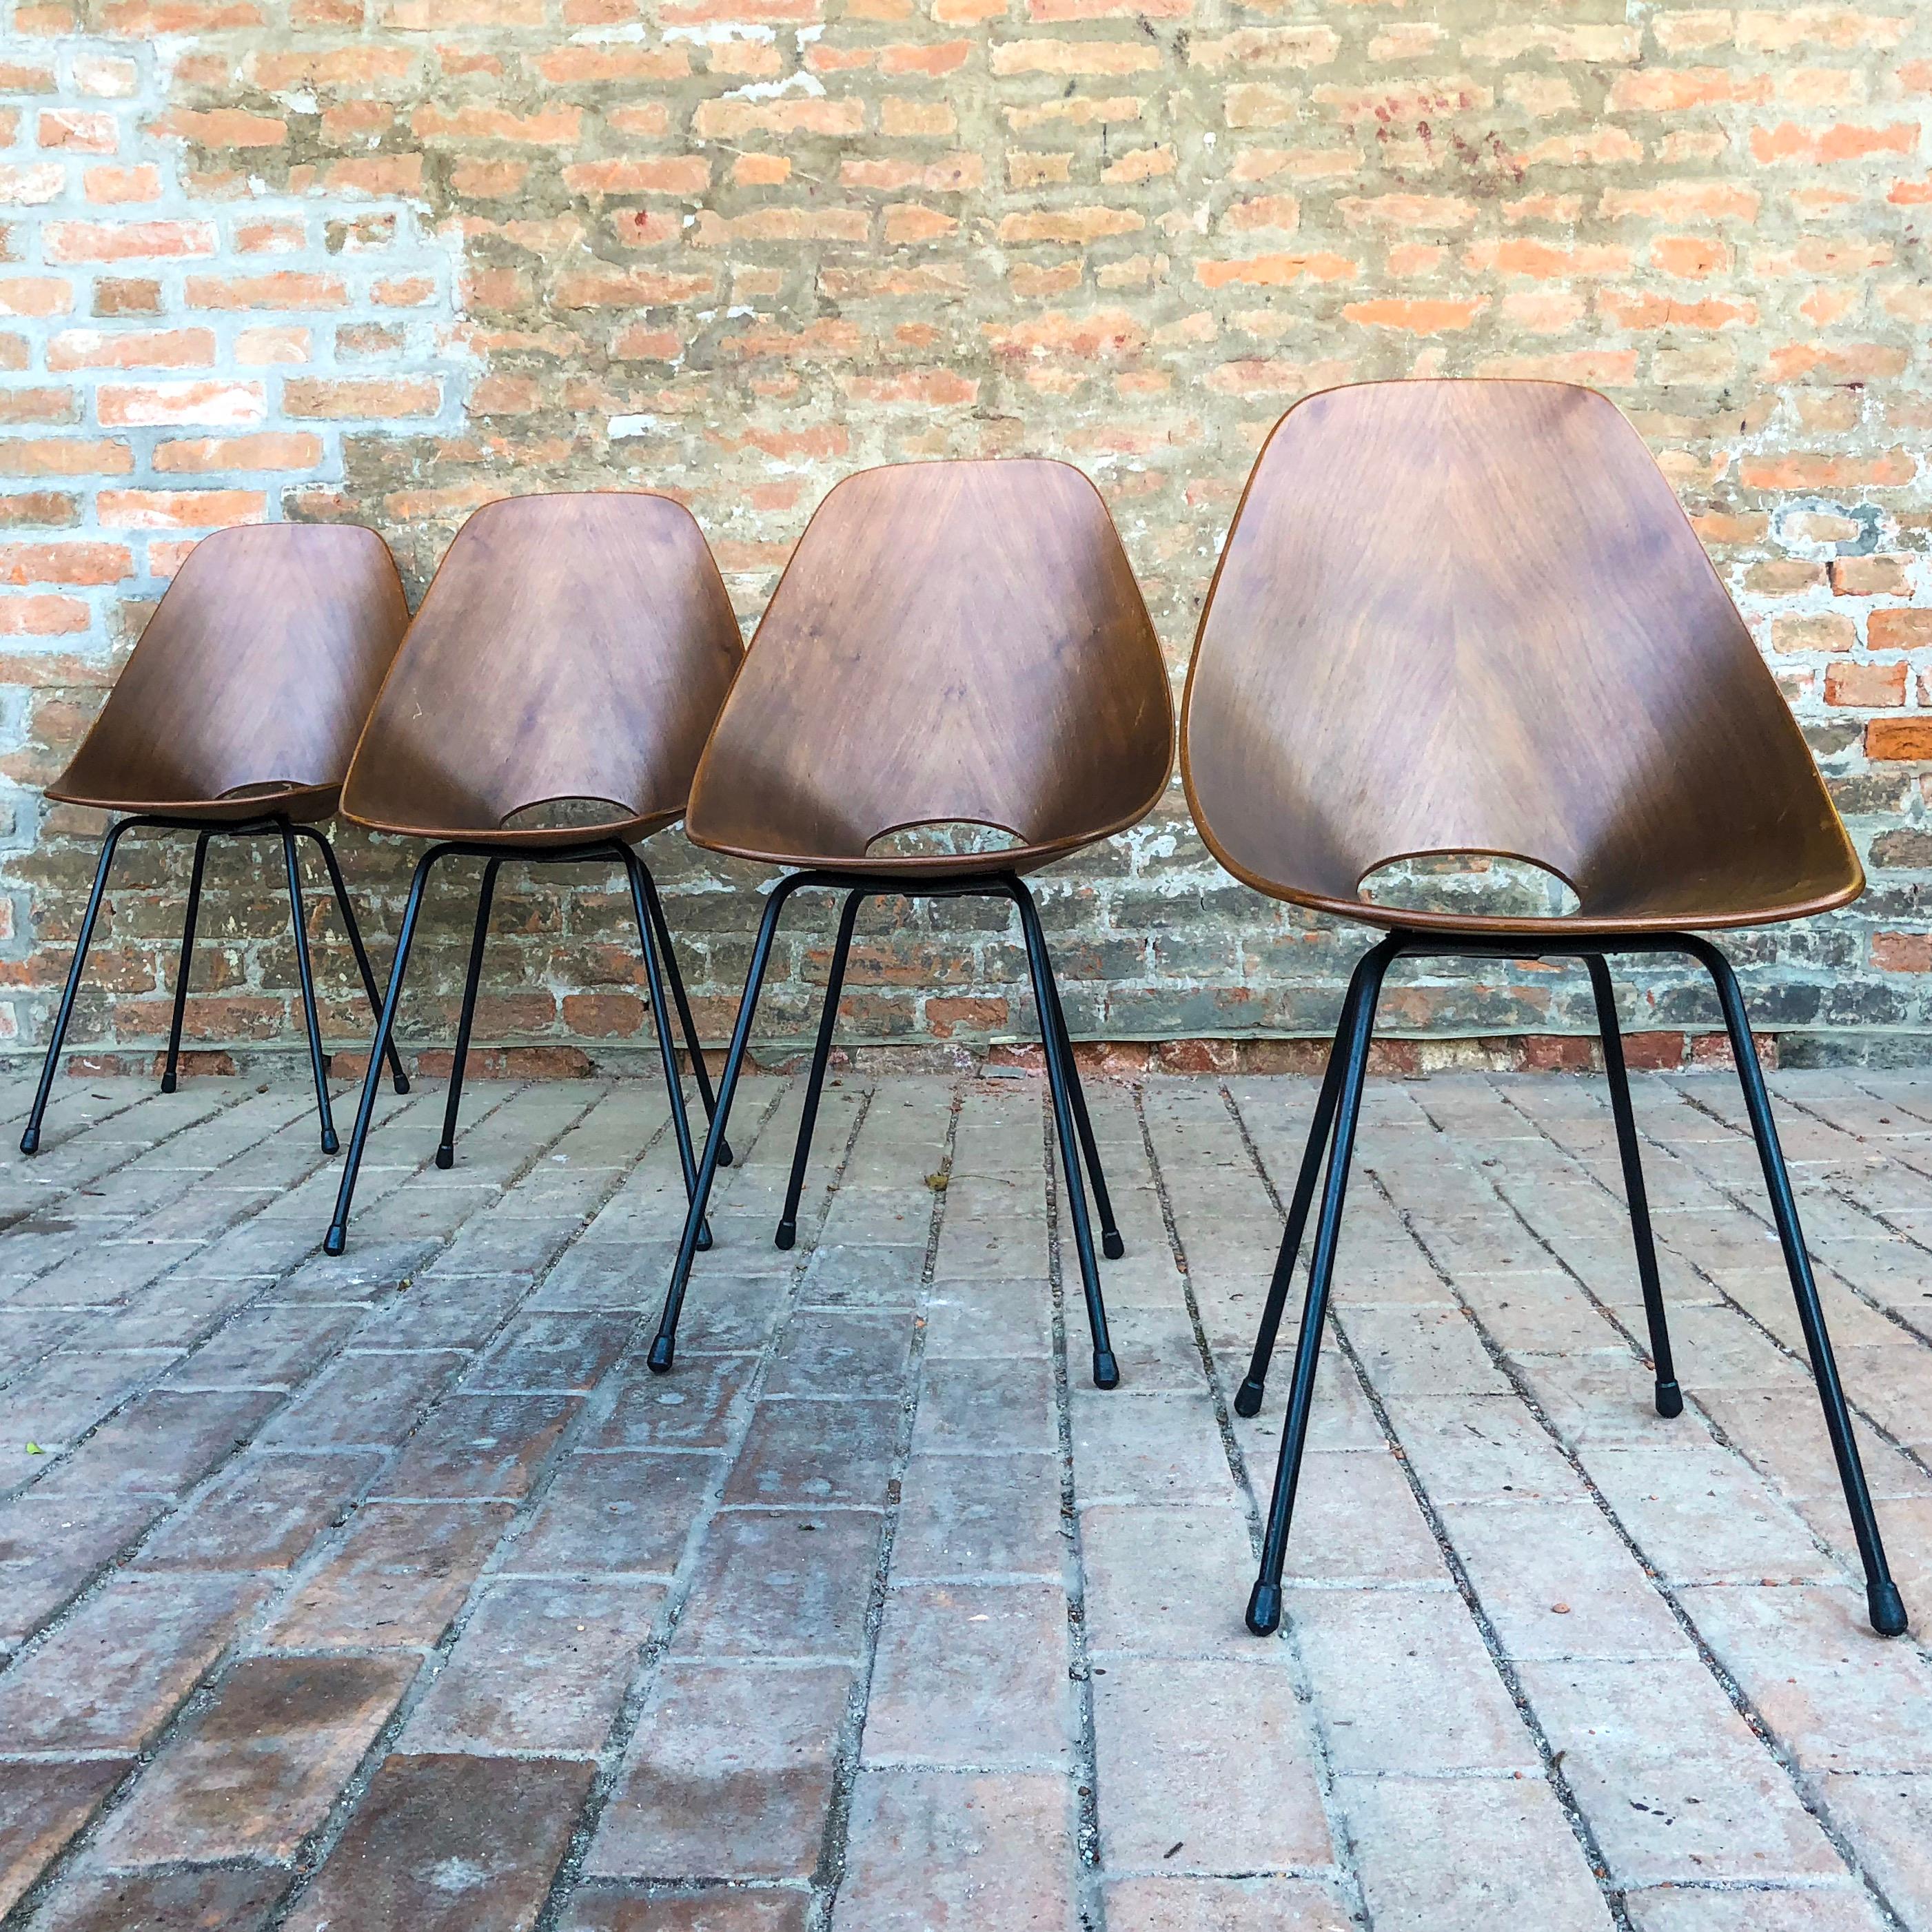 Vittorio Nobili Midcentury Teak “Medea” Dining Room Chairs, 1956, Set of Four In Good Condition For Sale In Vicenza, IT